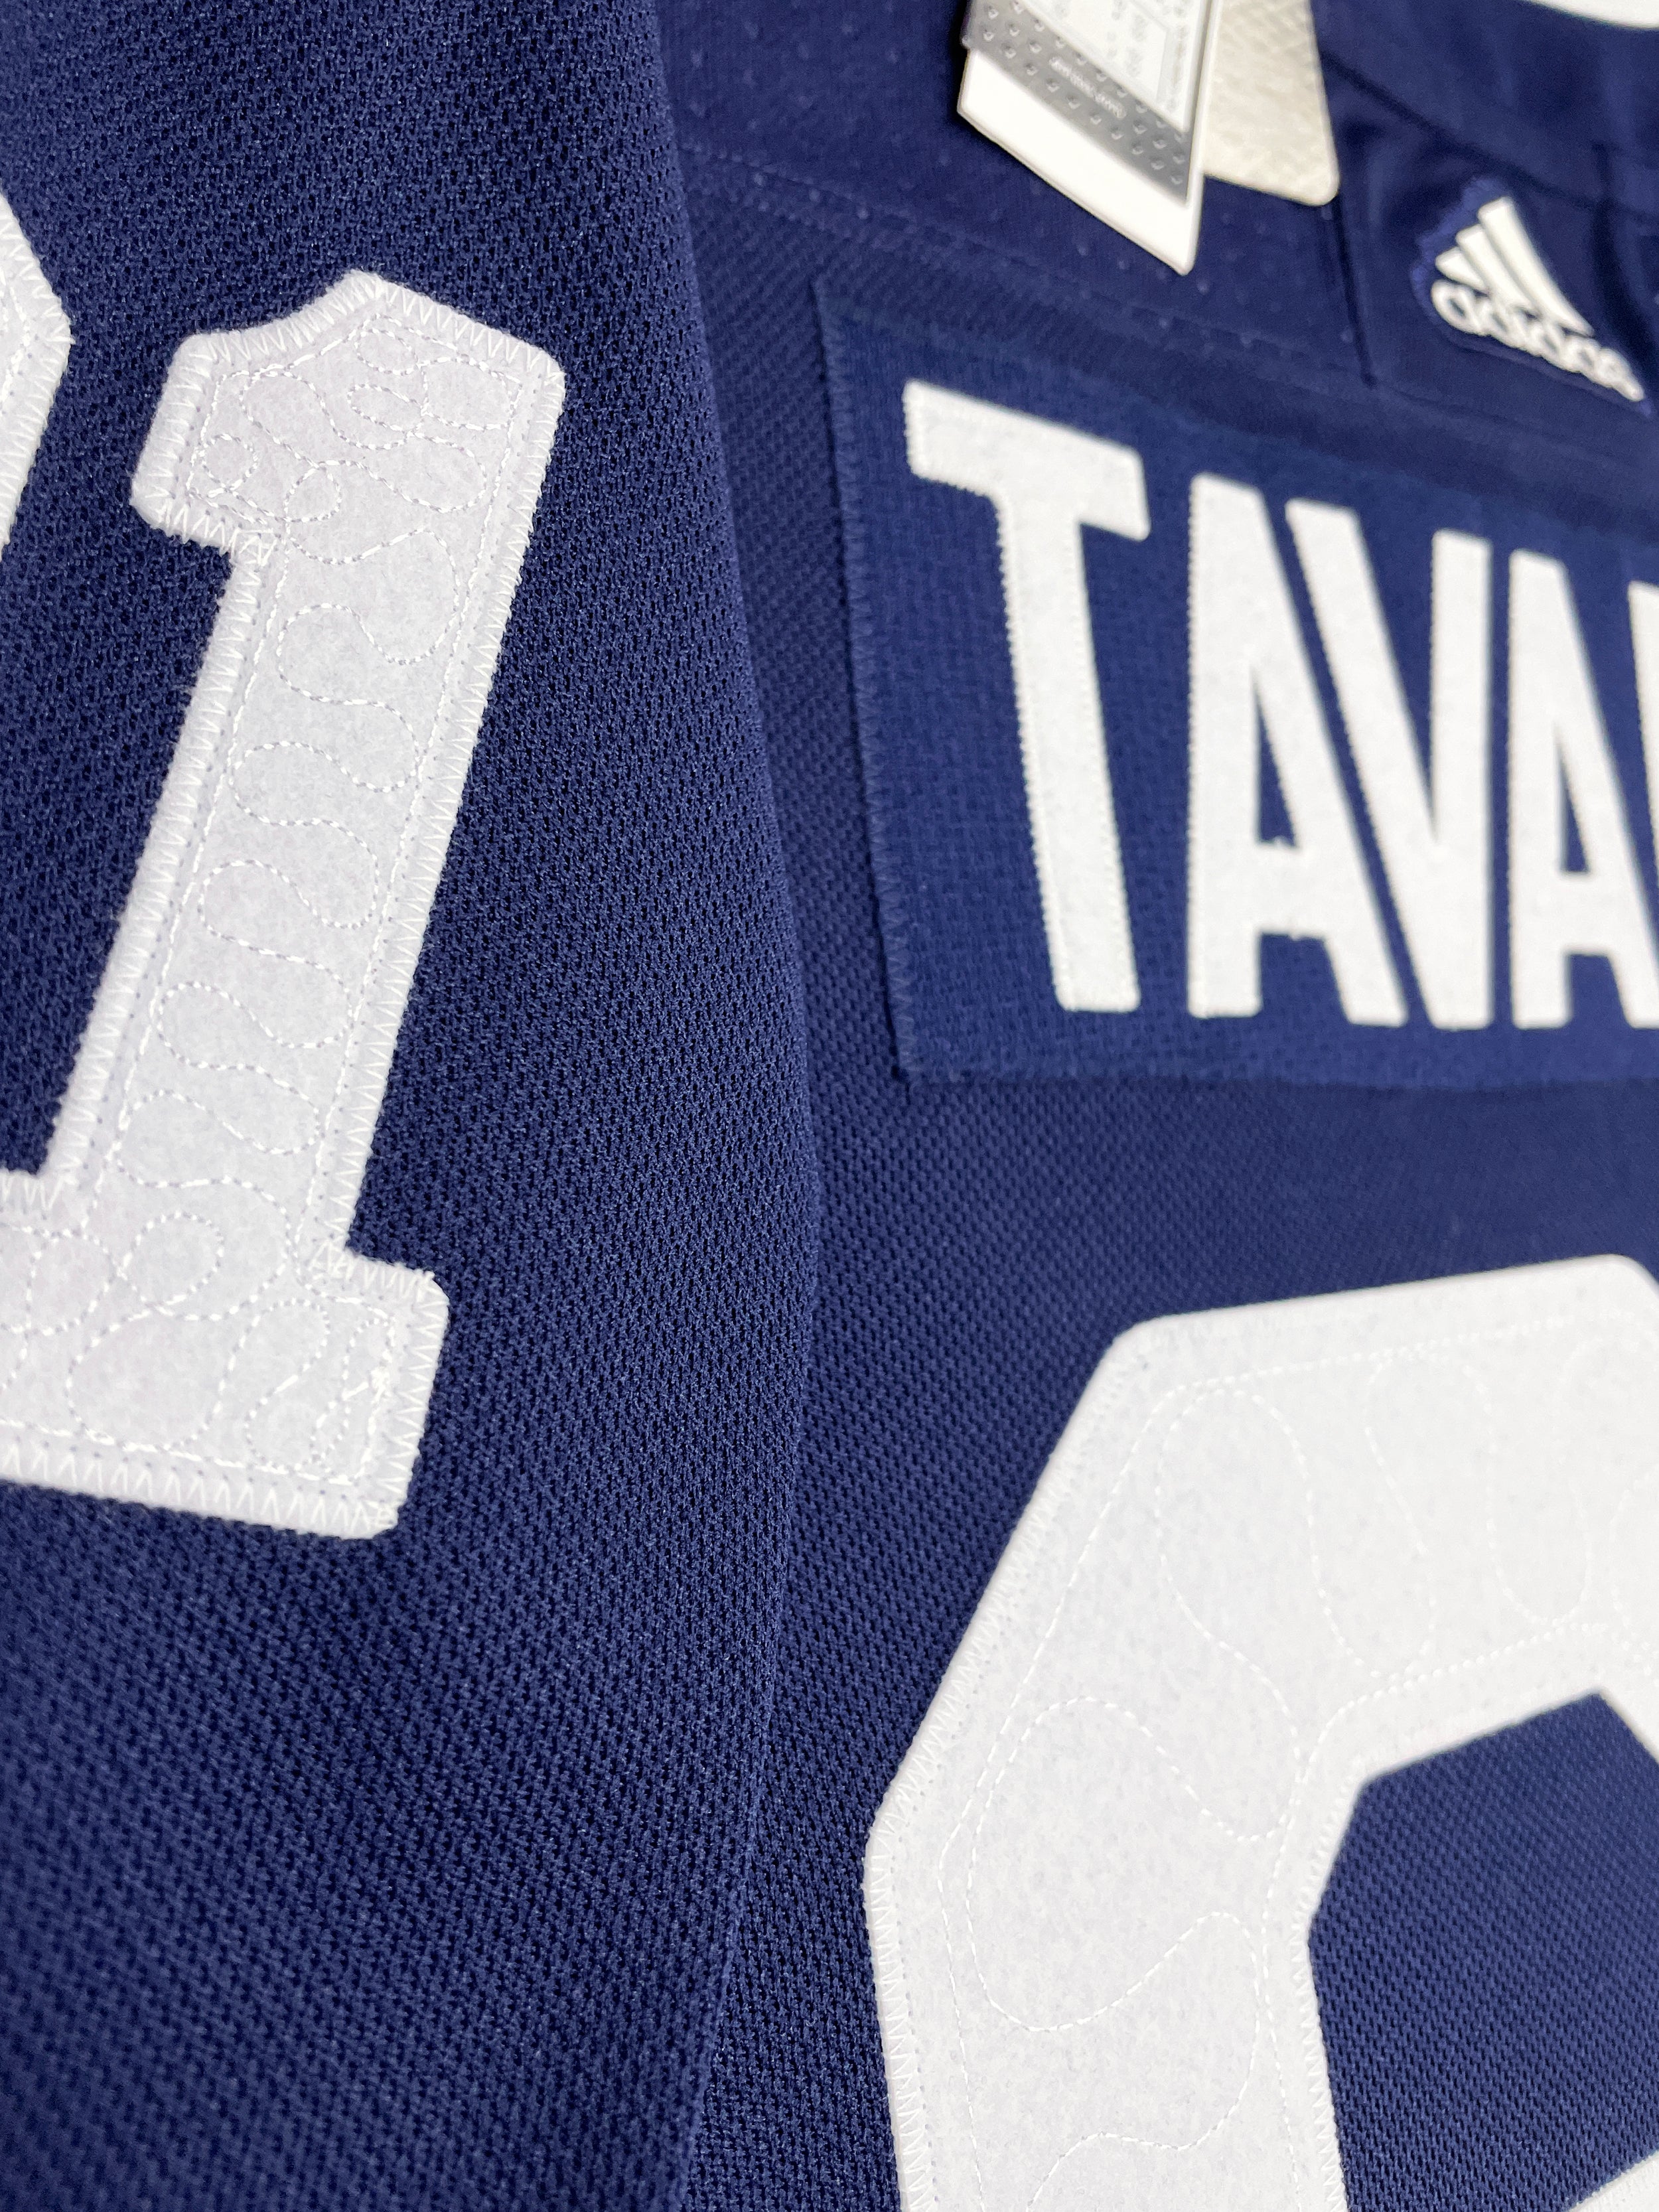 ANY NAME AND NUMBER TORONTO MAPLE LEAFS 2022 HERITAGE CLASSIC